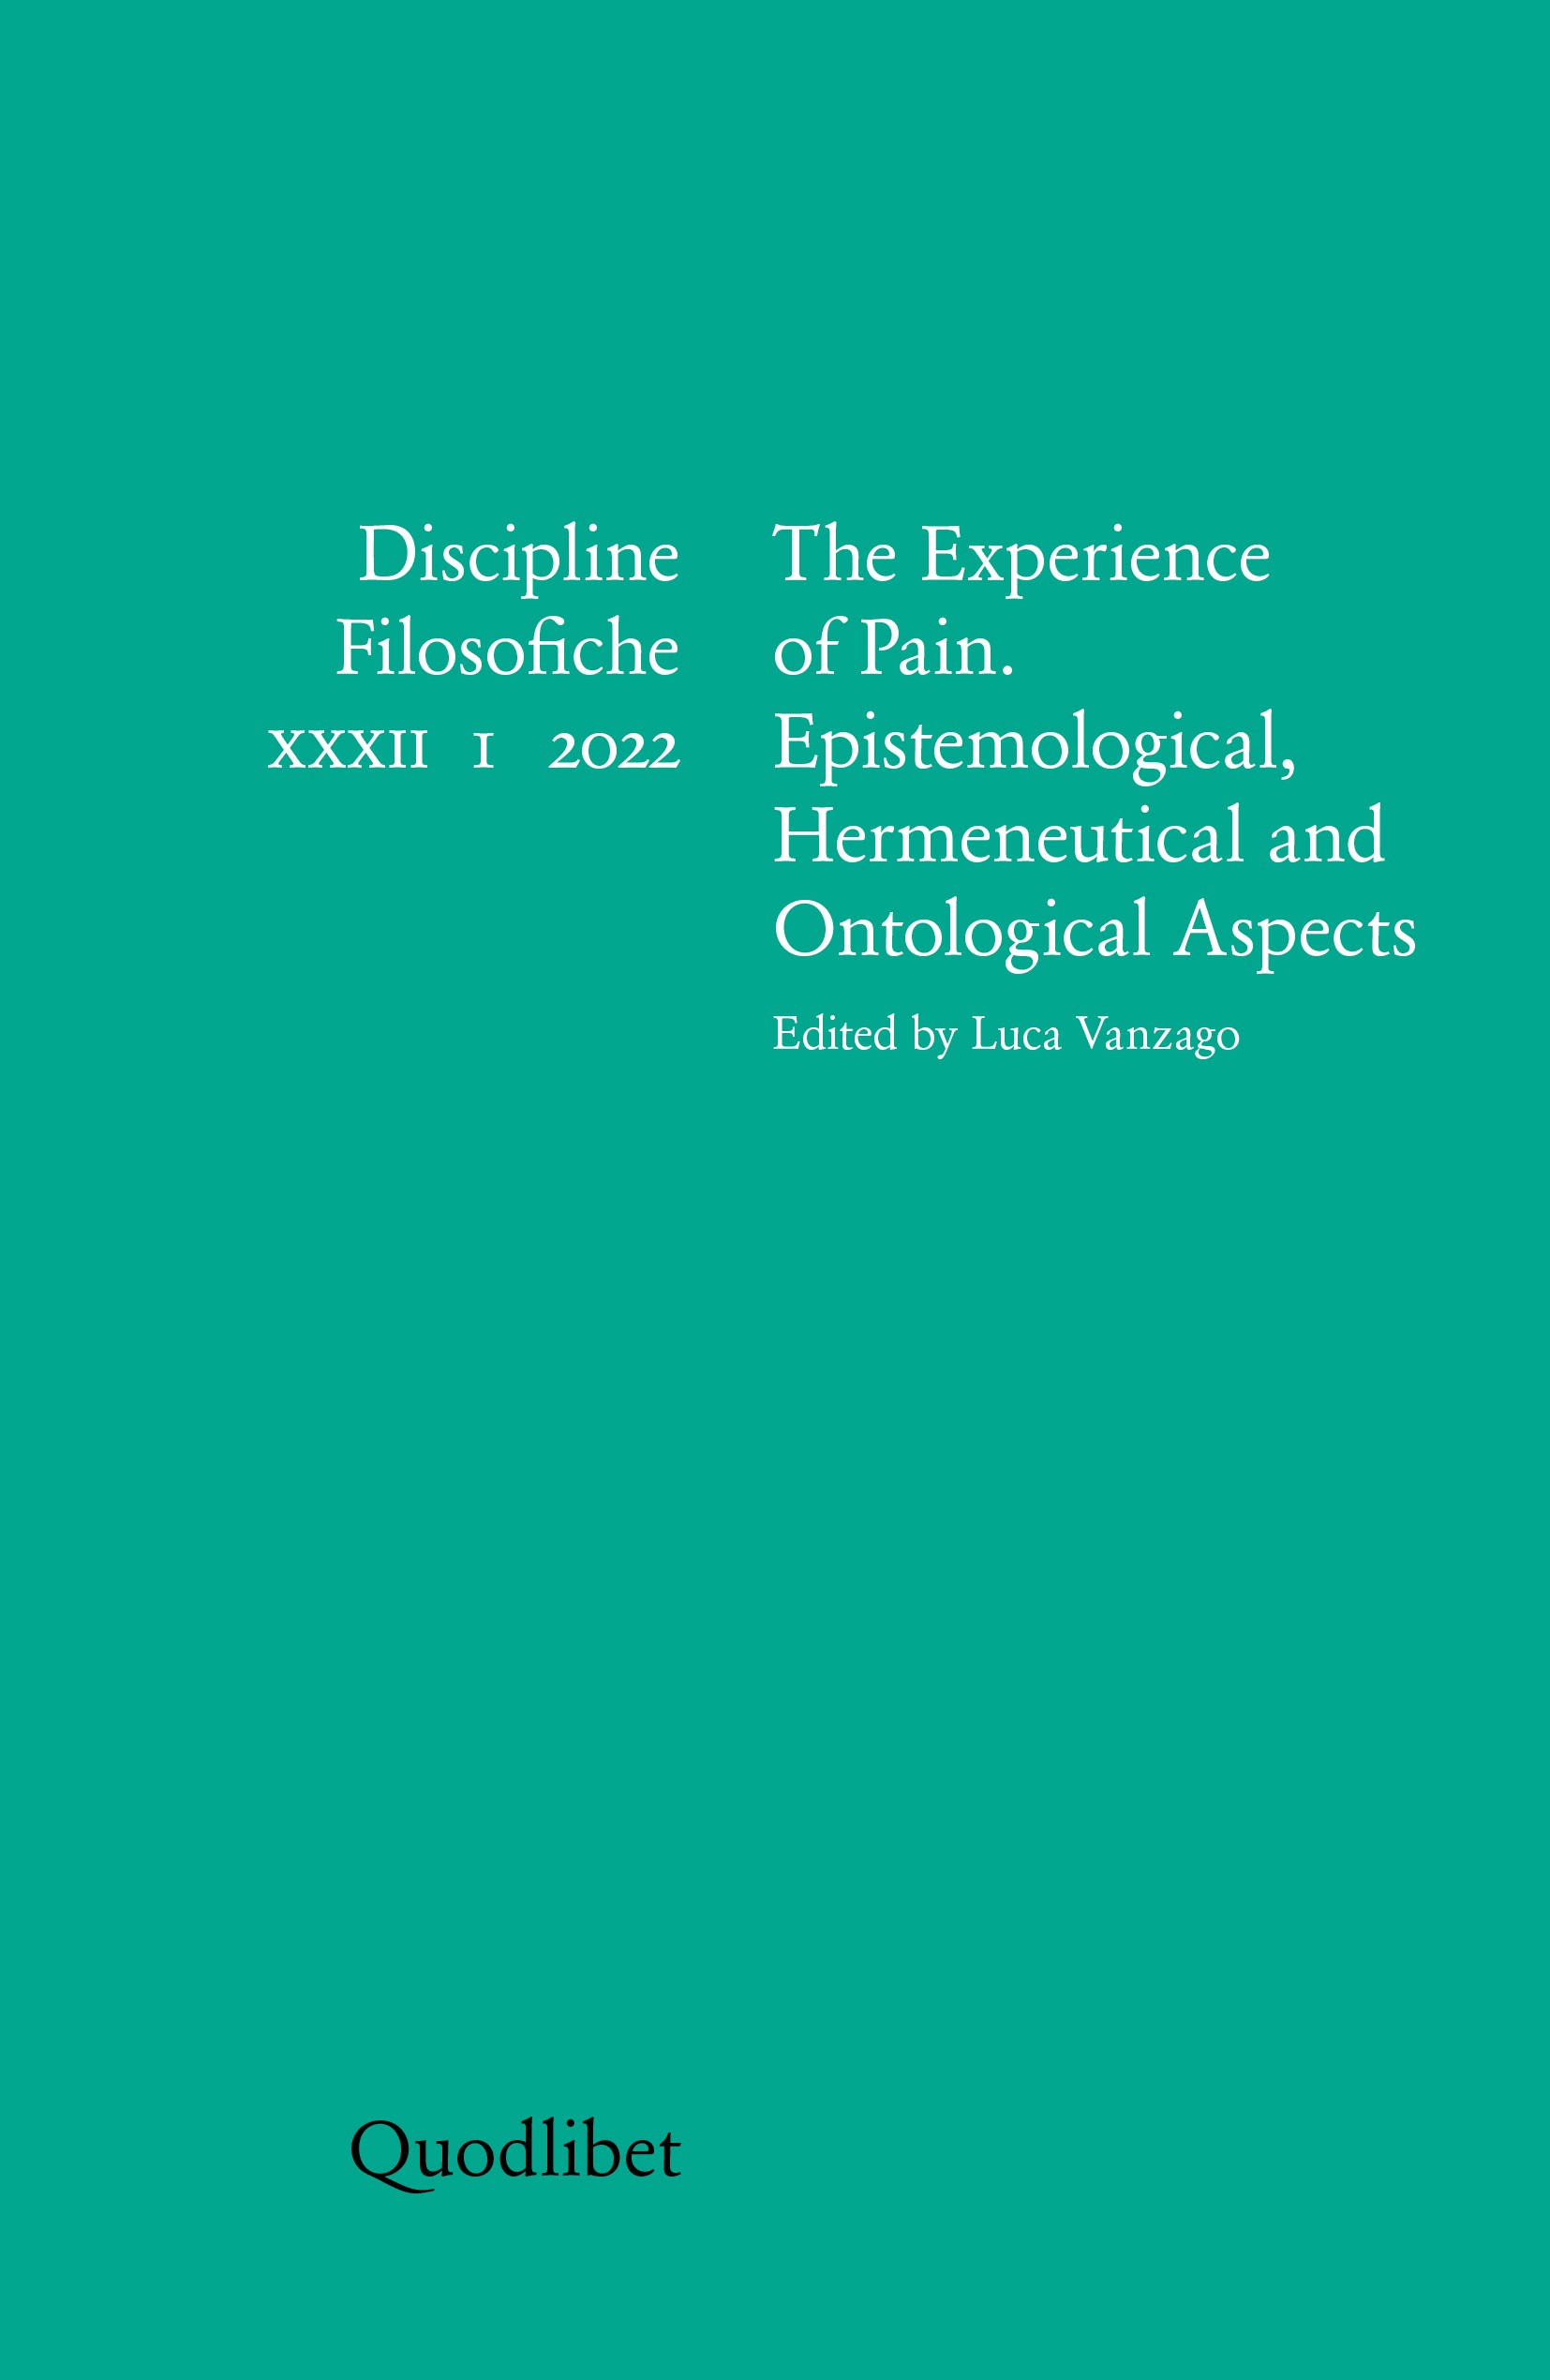 The Experience of Pain. Epistemological, Hermeneutical and Ontological Aspects - Librerie.coop